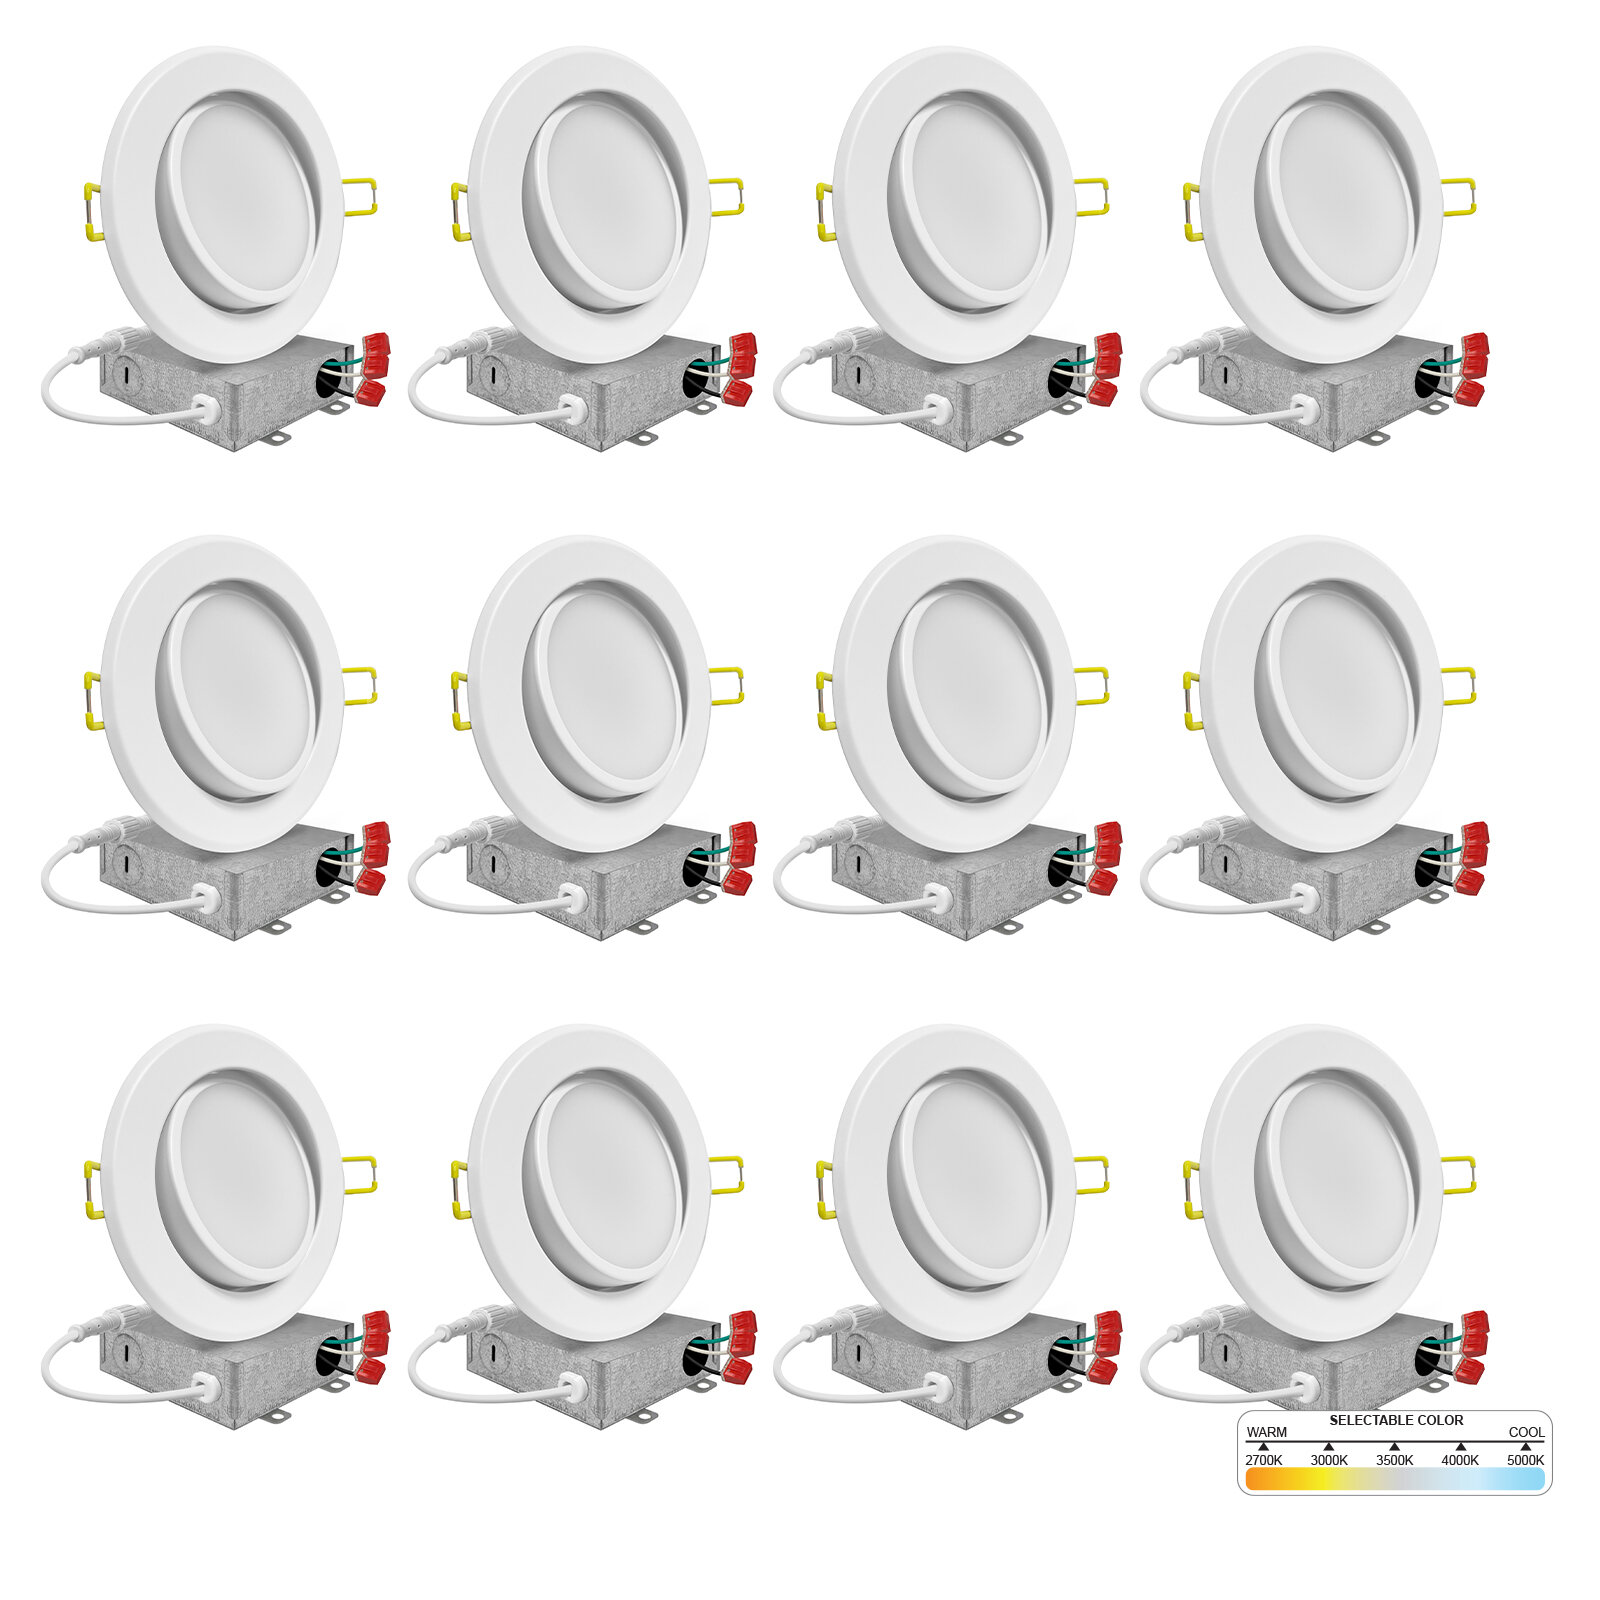 NUWATT 4" Adjustable Round Recessed LED Ceiling Light (12 Pack) Ultra Thin,  5-In-1 CCT: 2700K/ 3000K/3500K/4000K/5000K, 630 Lumens, 120V, Dimmable, IC  Rated, W/ J Box; 9W=50W/65W Equiv, White Trim  Reviews